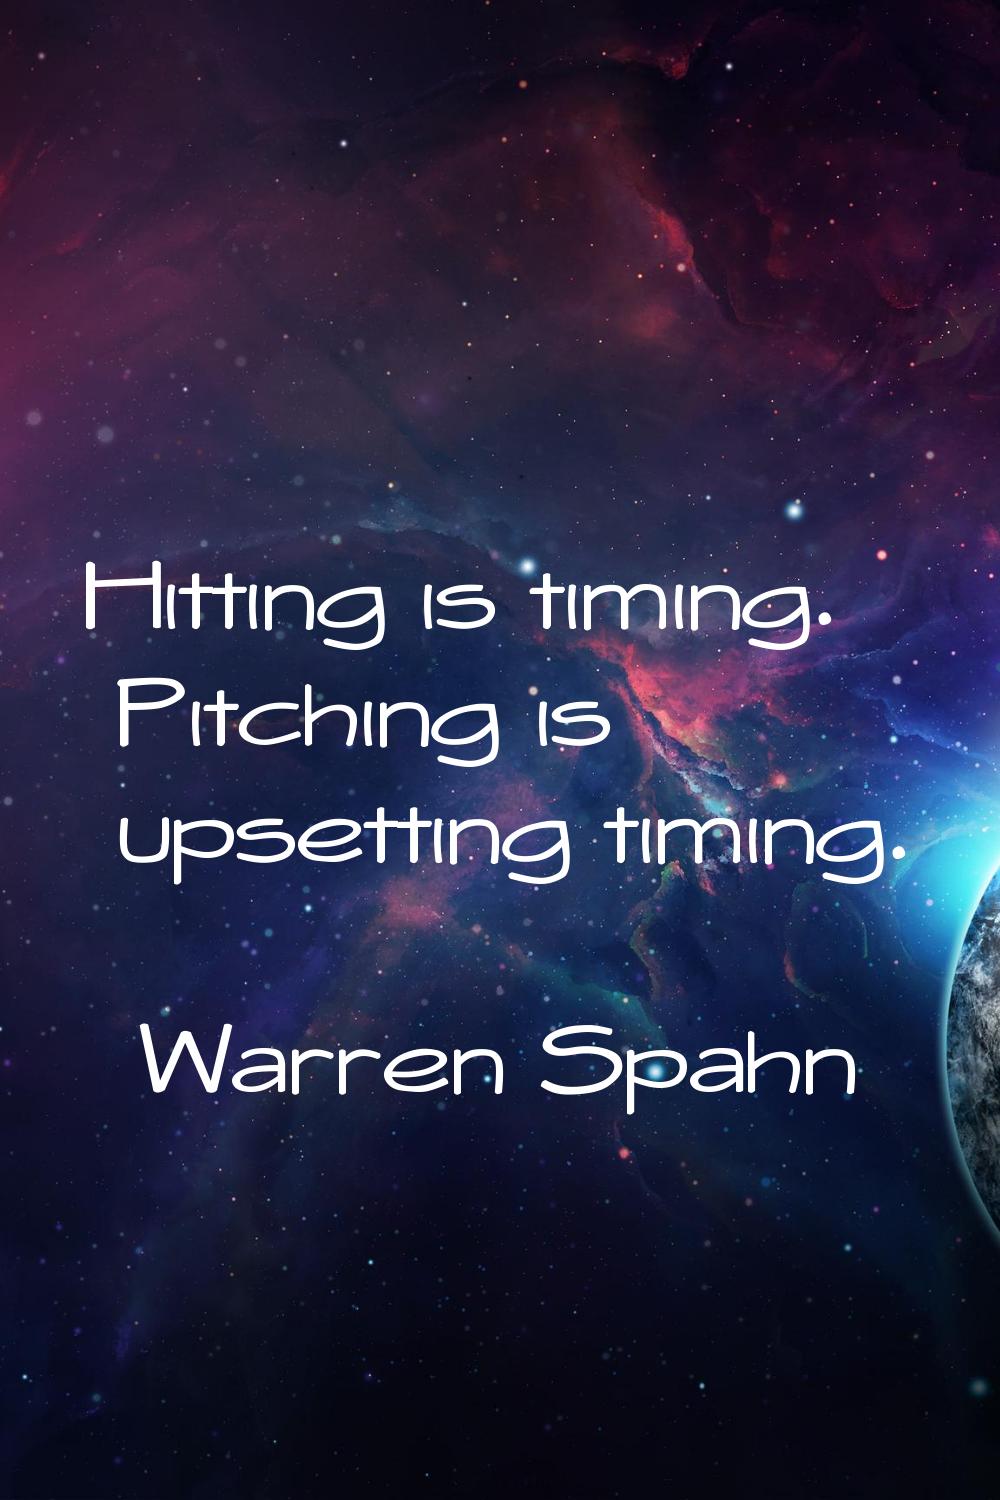 Hitting is timing. Pitching is upsetting timing.